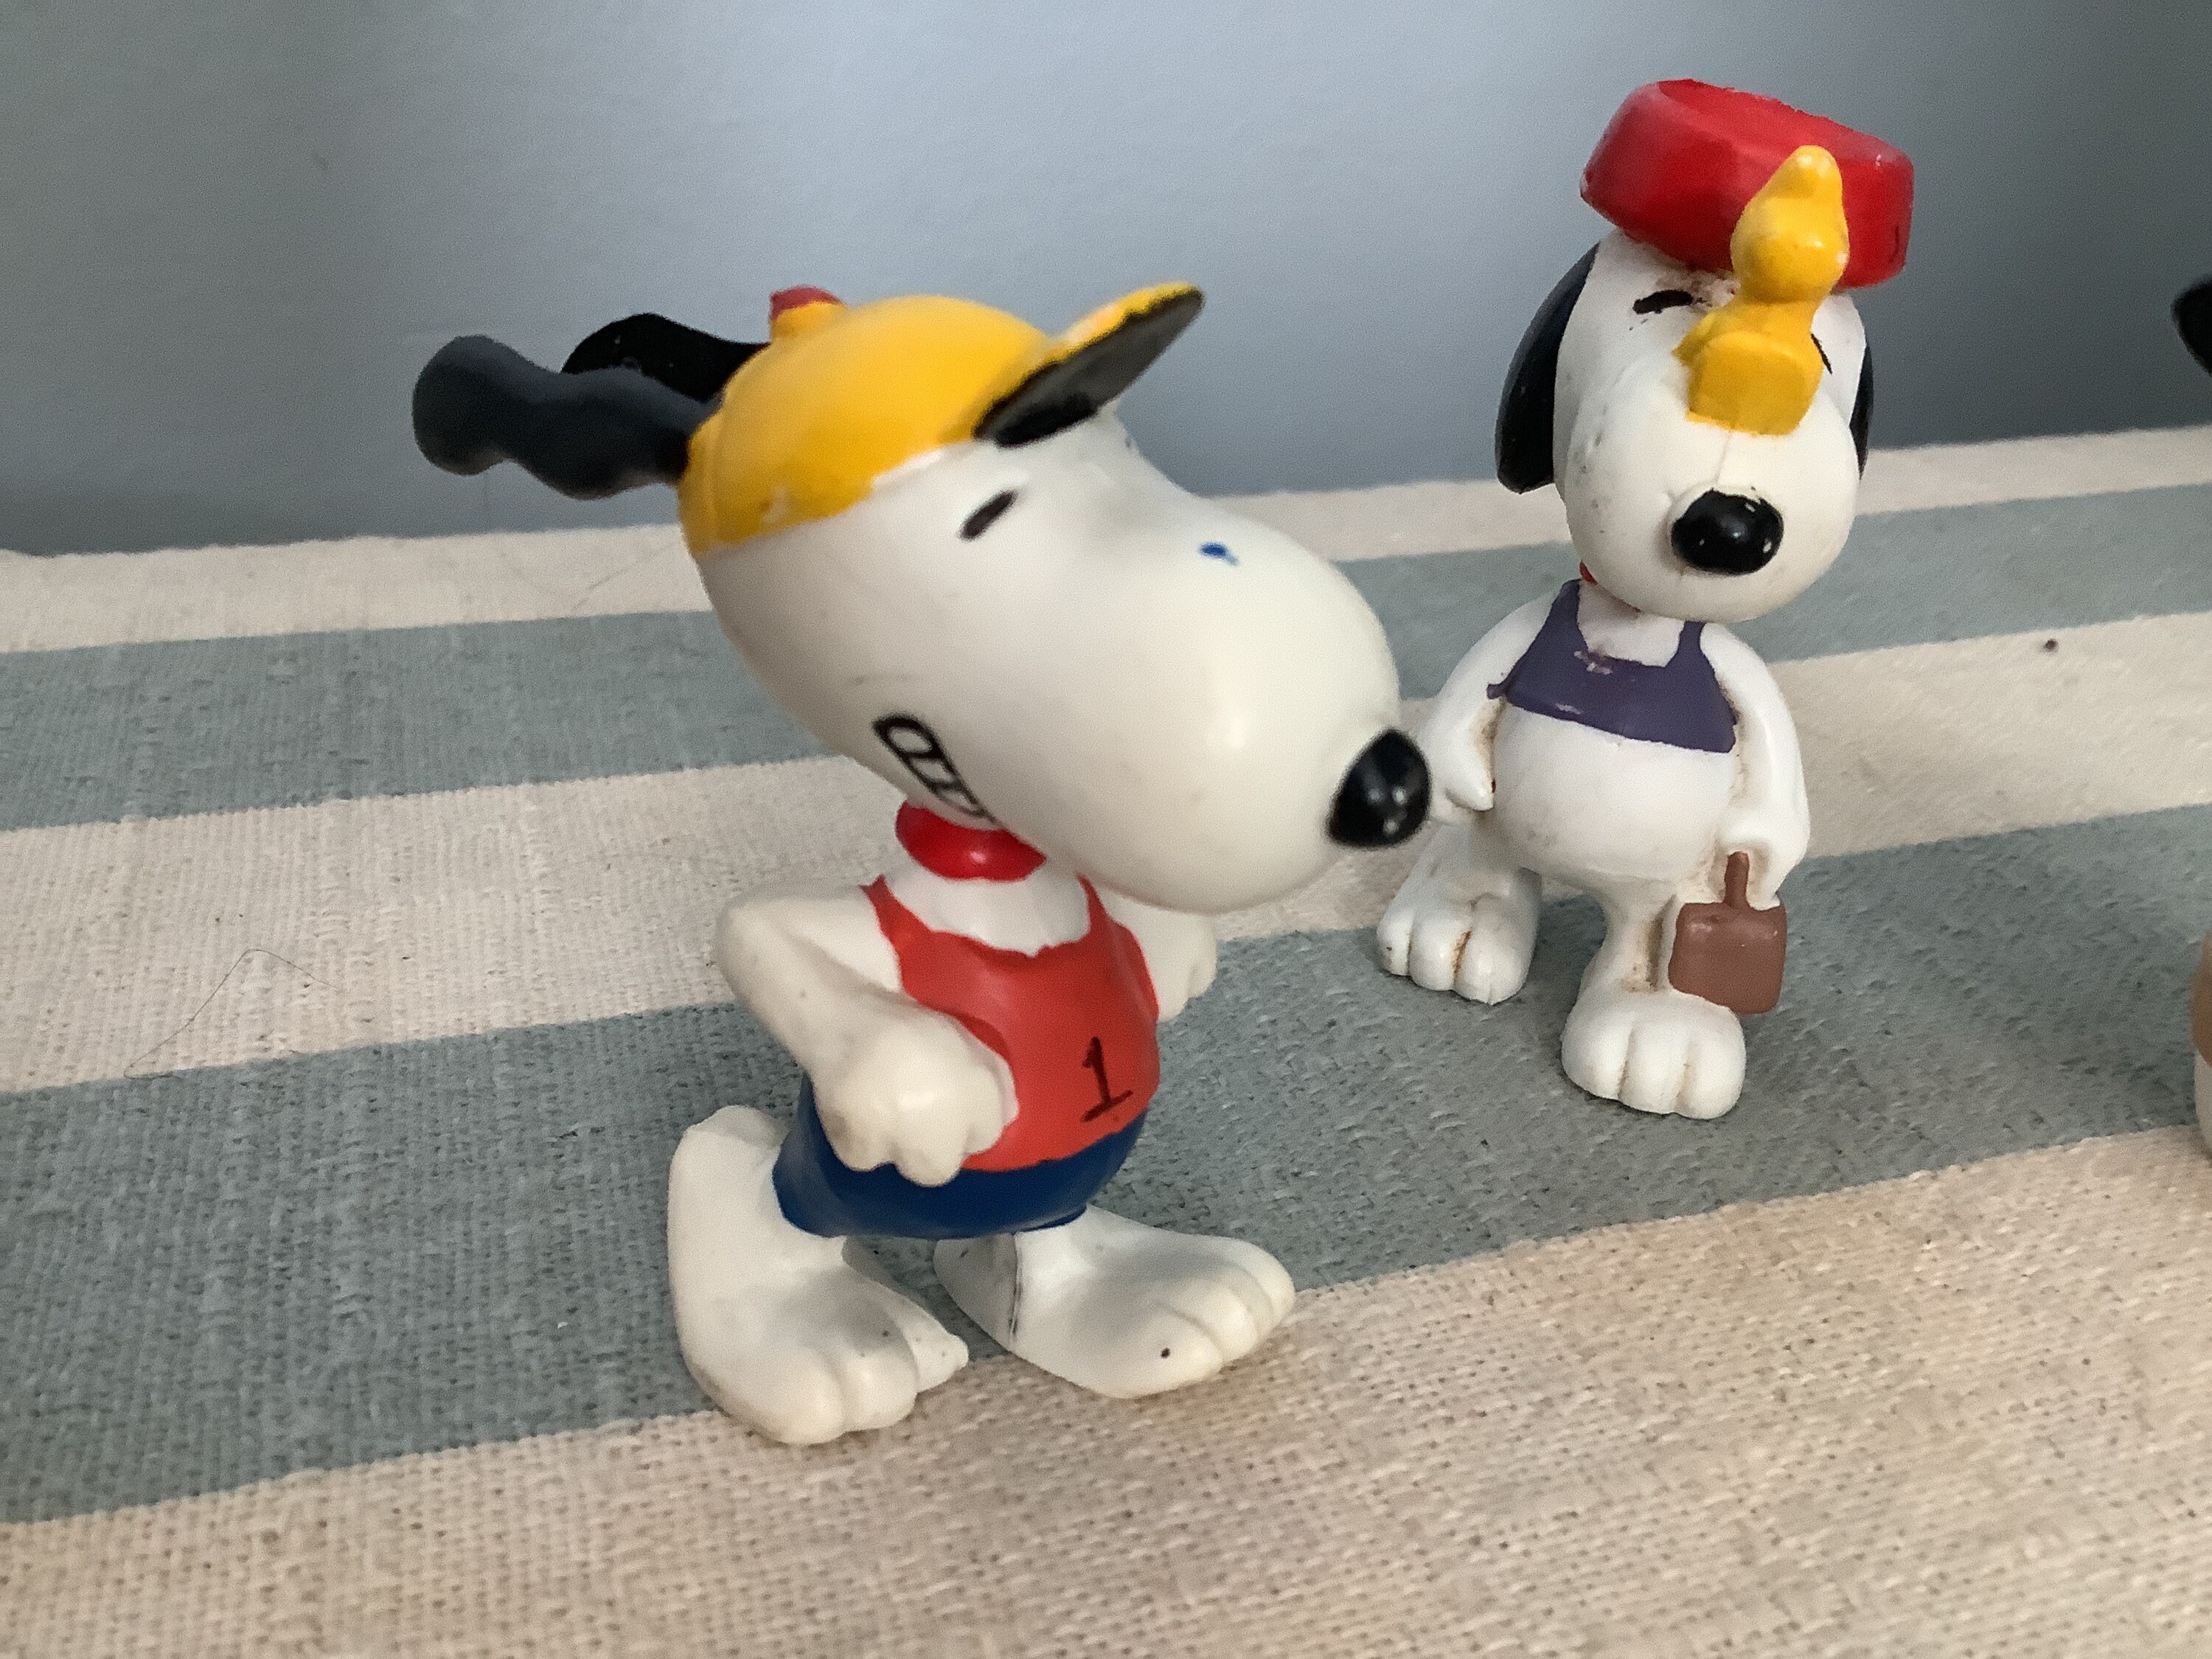 Vintage Peanuts Snoopy Figures Lot of 2 United Feature Syndicate